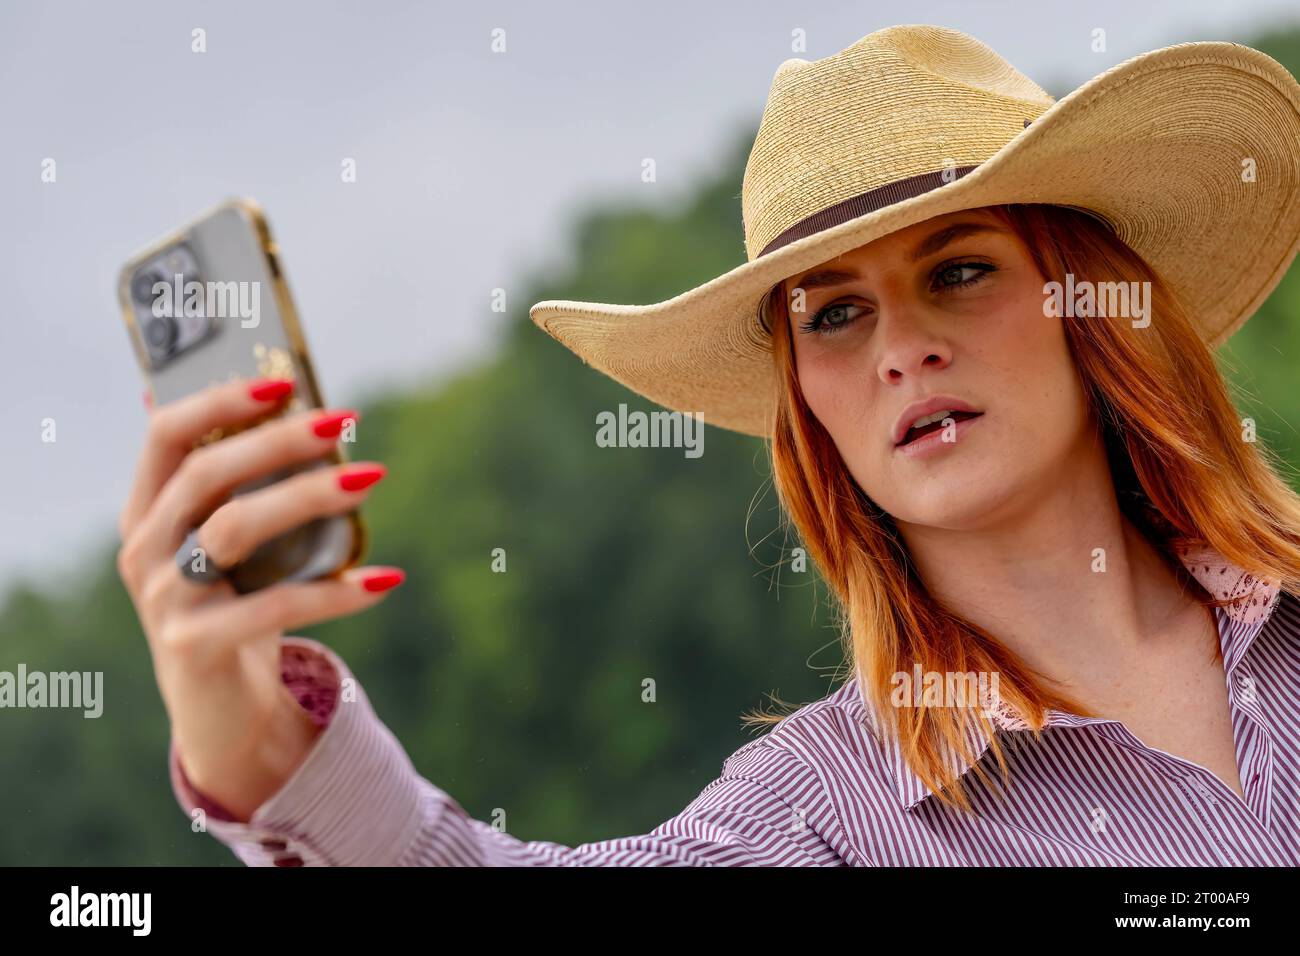 A Lovely Red Headed Cowgirl Uses Her Cellphone In A Country Western Setting Outdoors Stock Photo